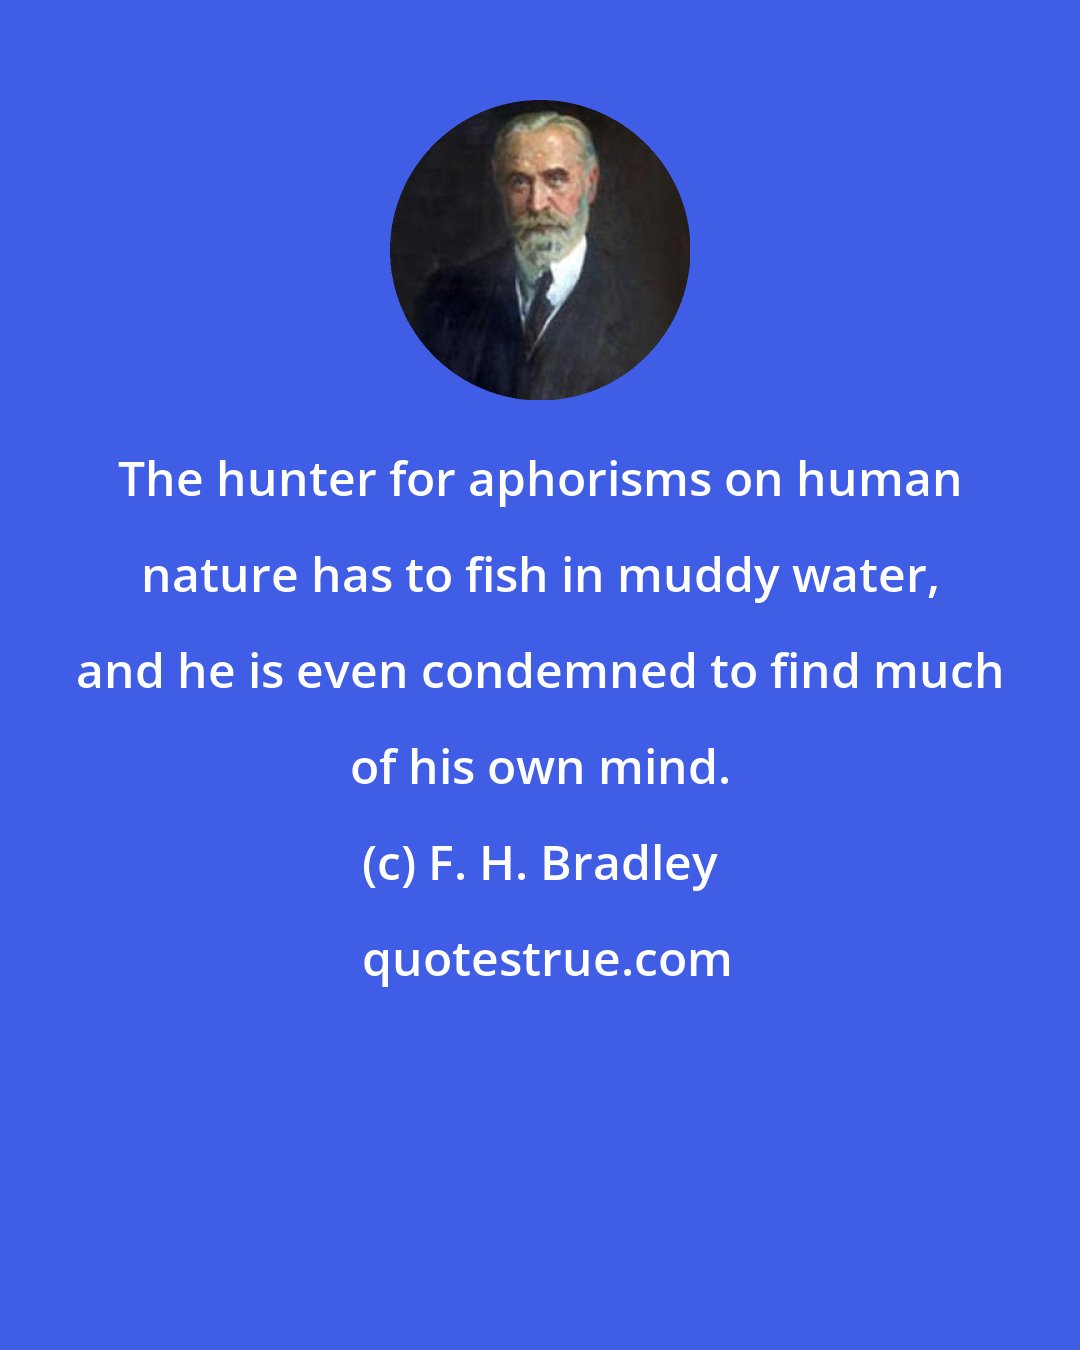 F. H. Bradley: The hunter for aphorisms on human nature has to fish in muddy water, and he is even condemned to find much of his own mind.